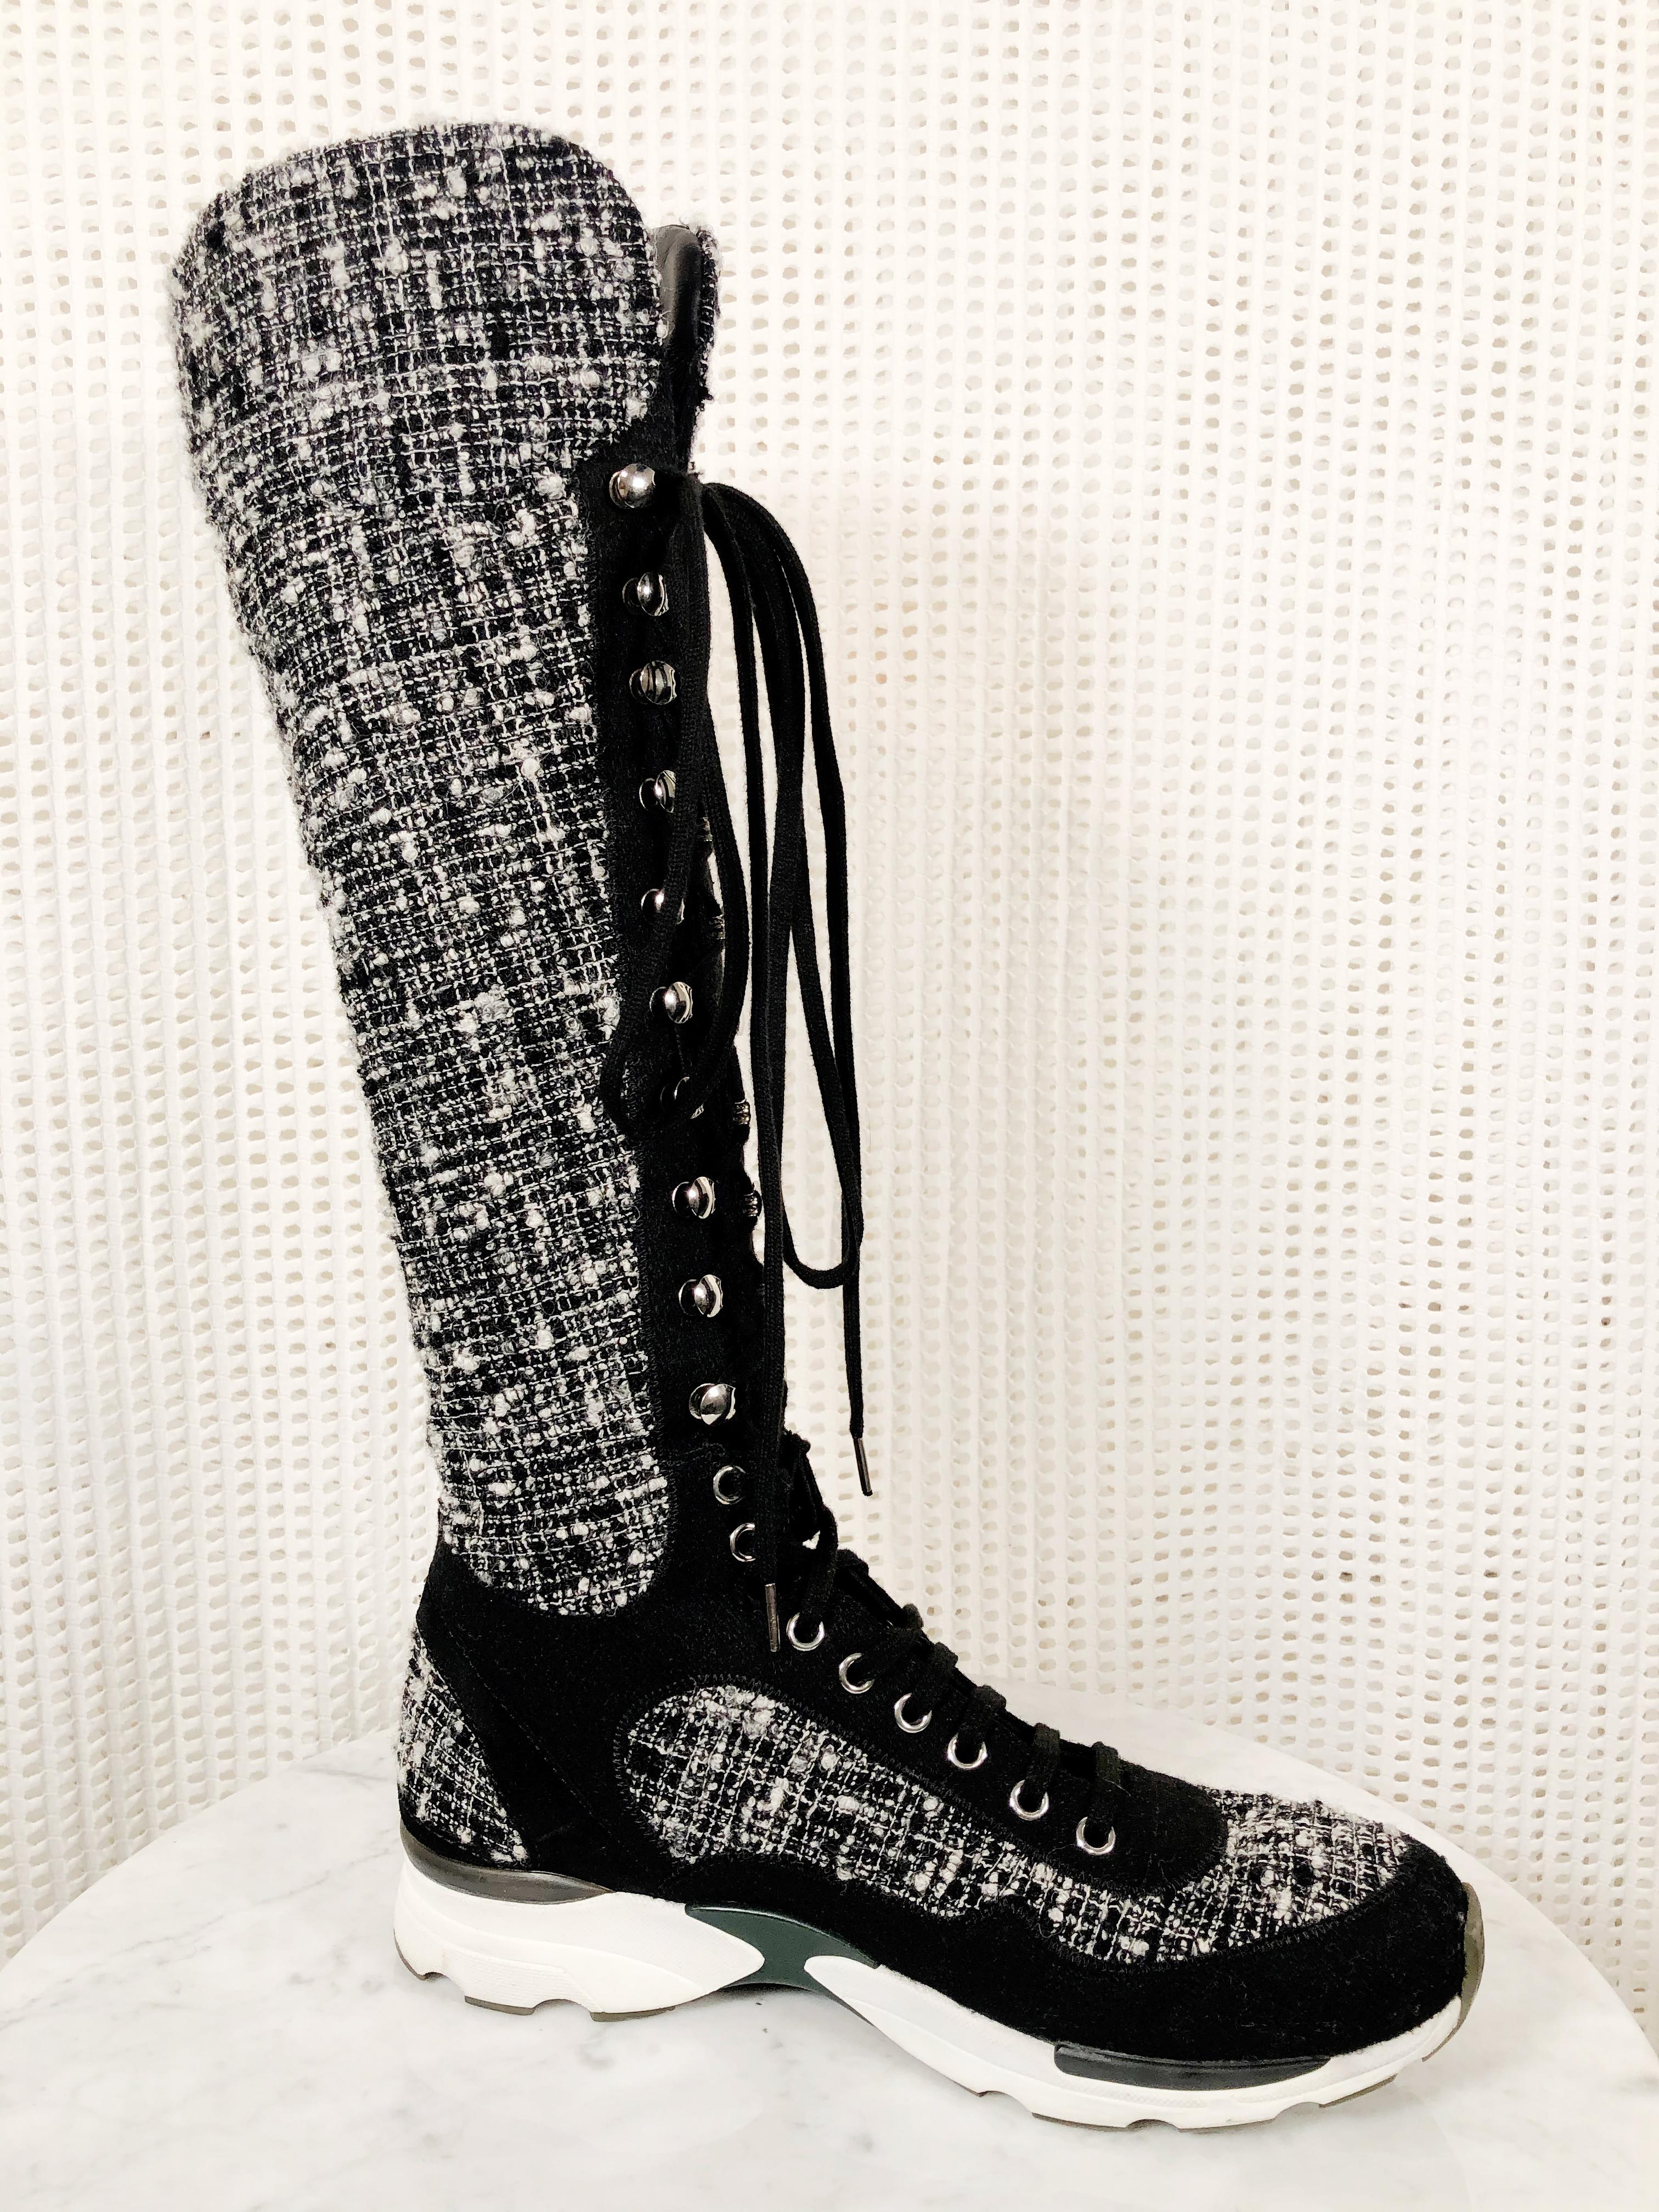 Chanel Fantasy Tweed Black & White Knee-High Sneaker Boots W/ 